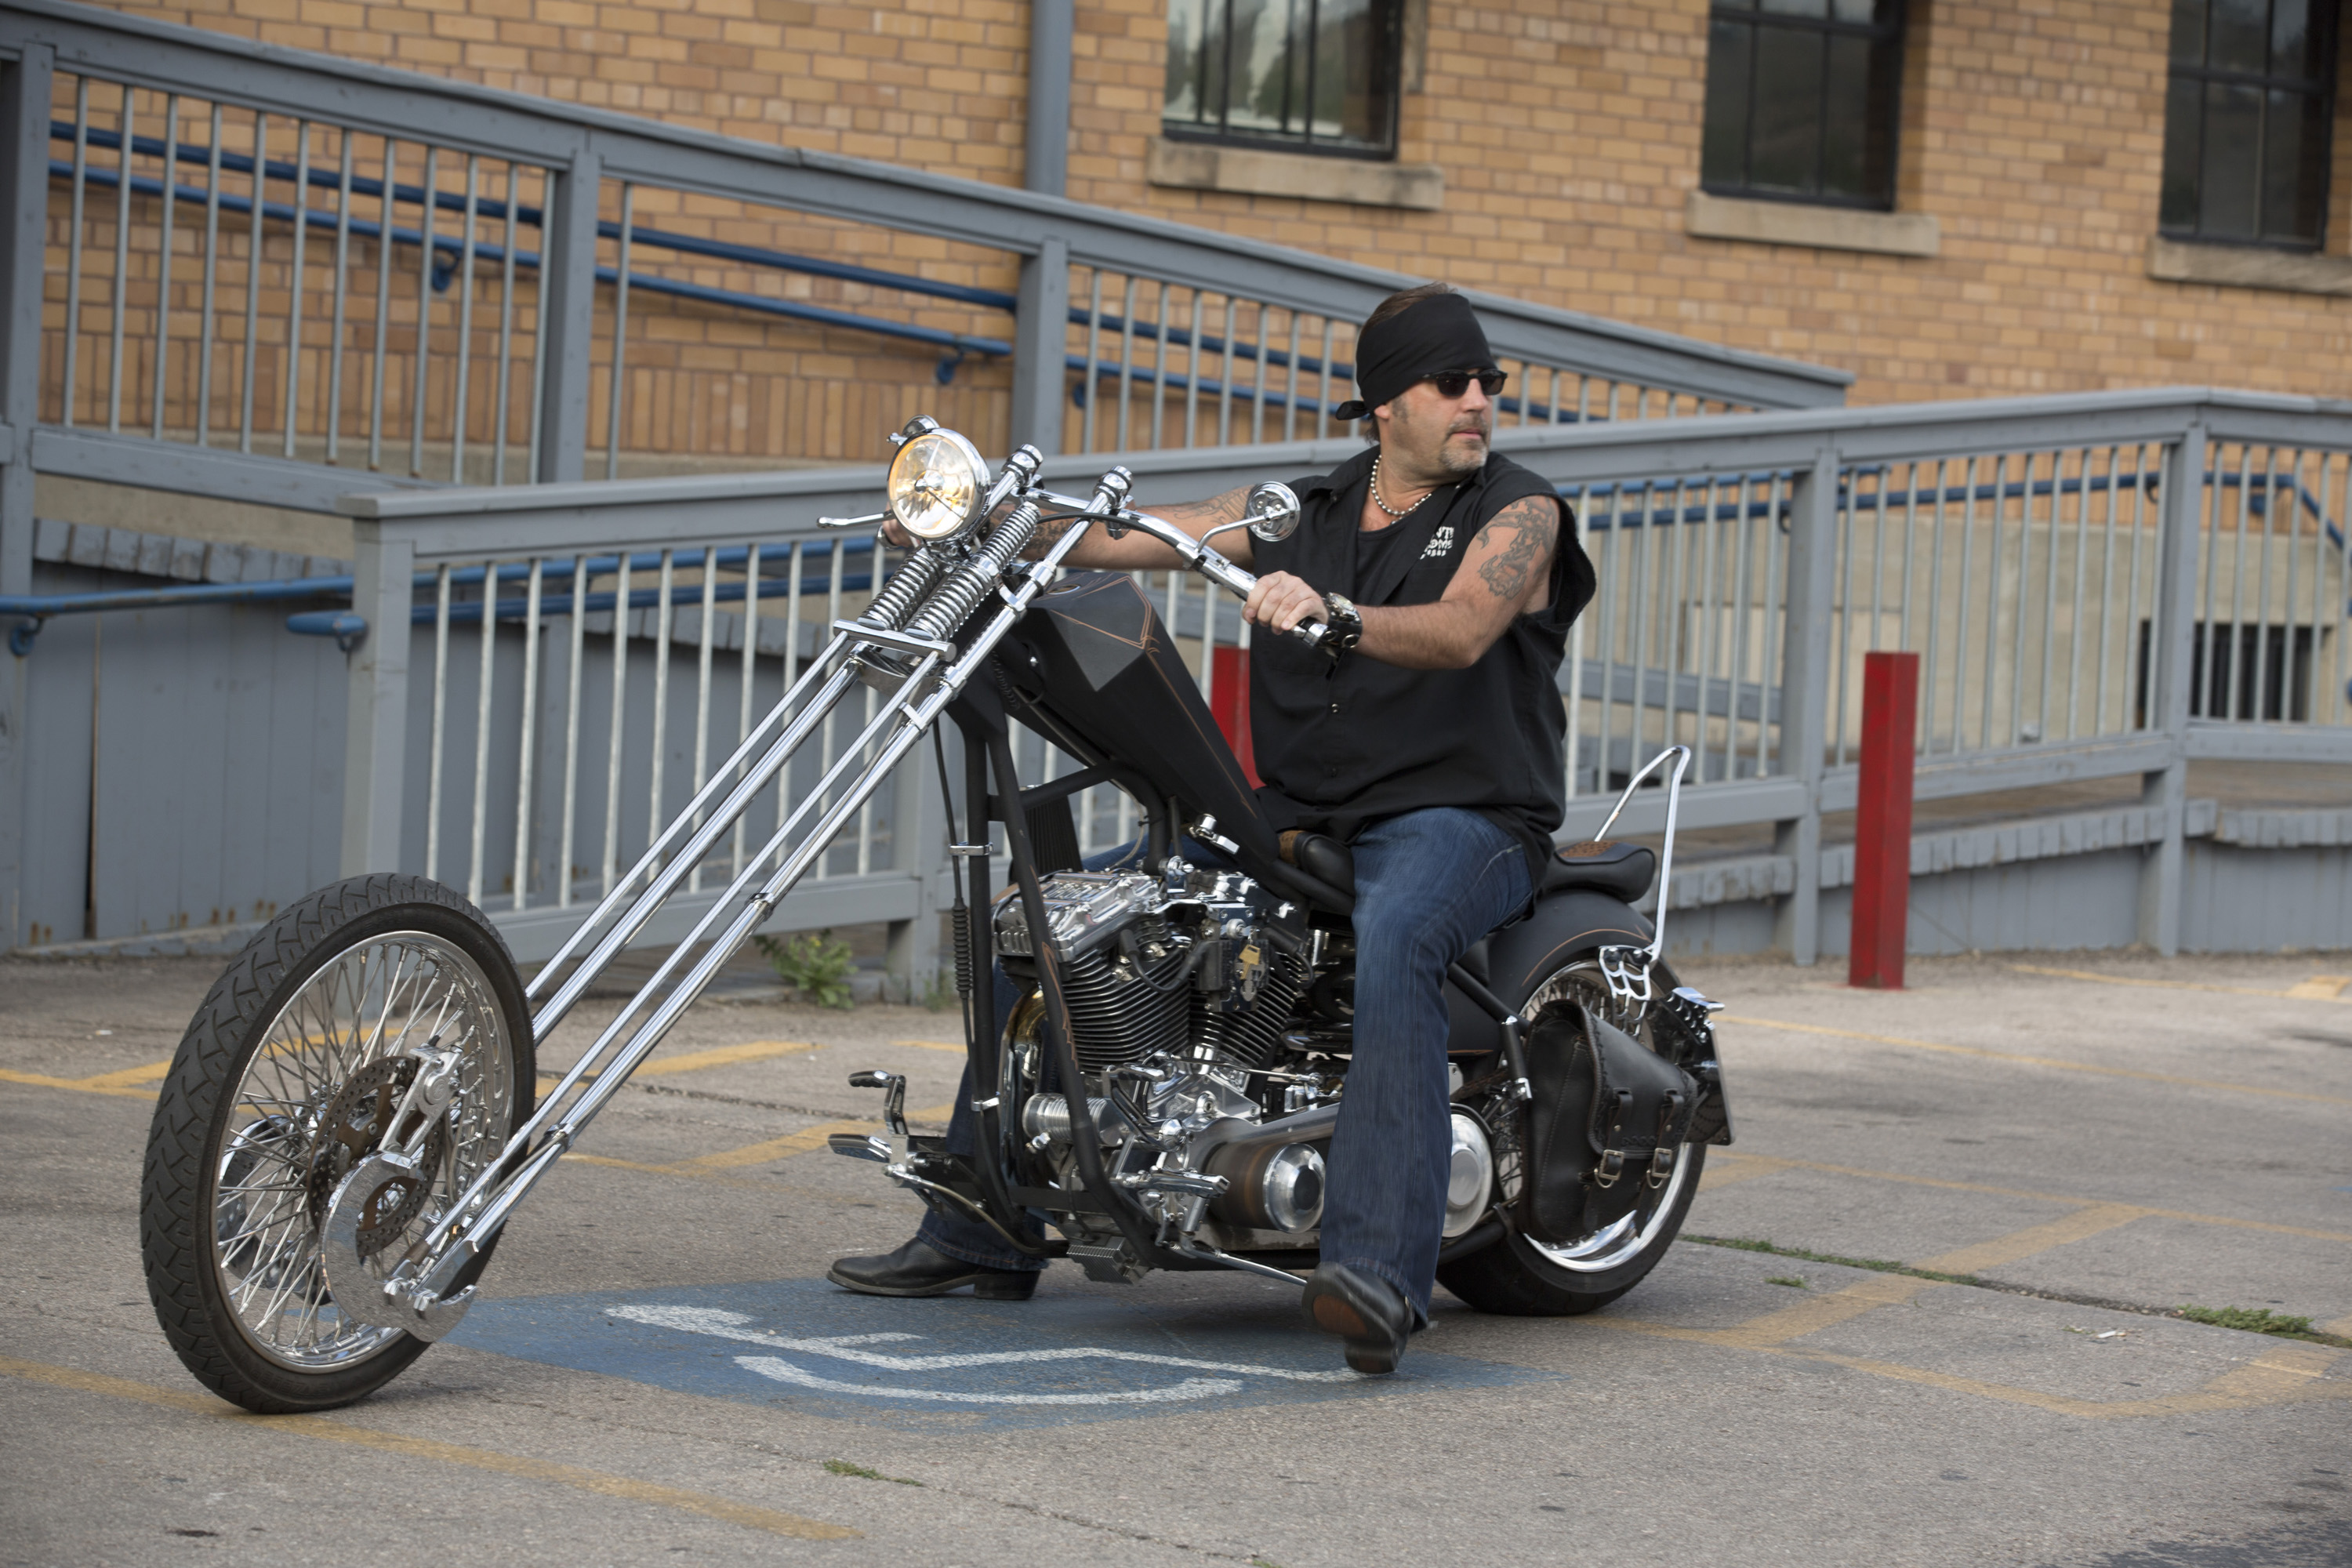 Sturgis Pictures - Counting Cars - HISTORY.com